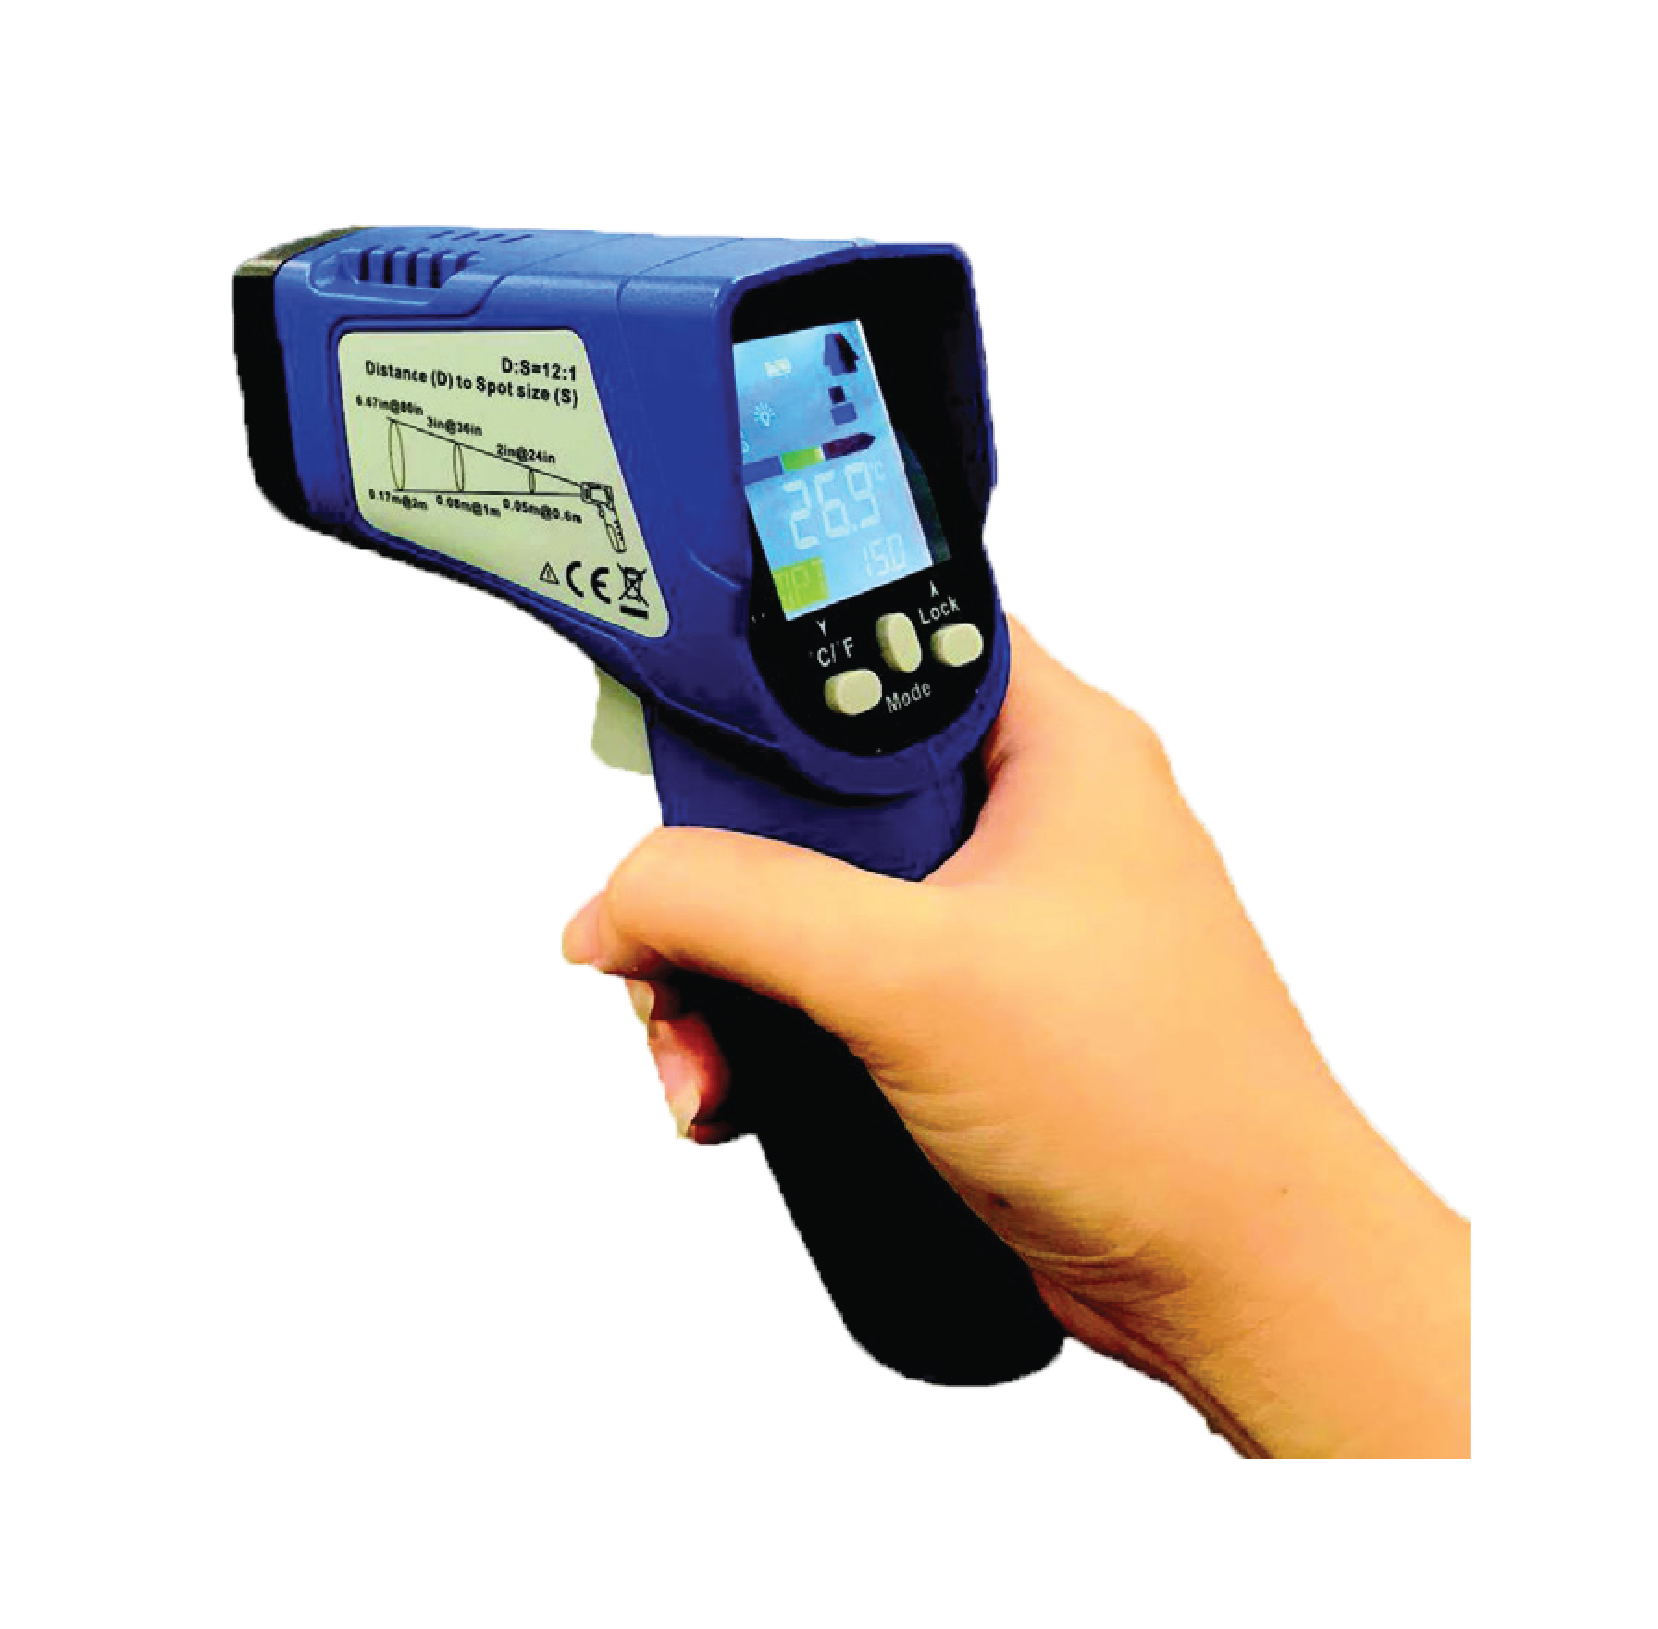 BG52, BLUE GIZMO MULTIFUNCTION INFRARED THERMOMETER